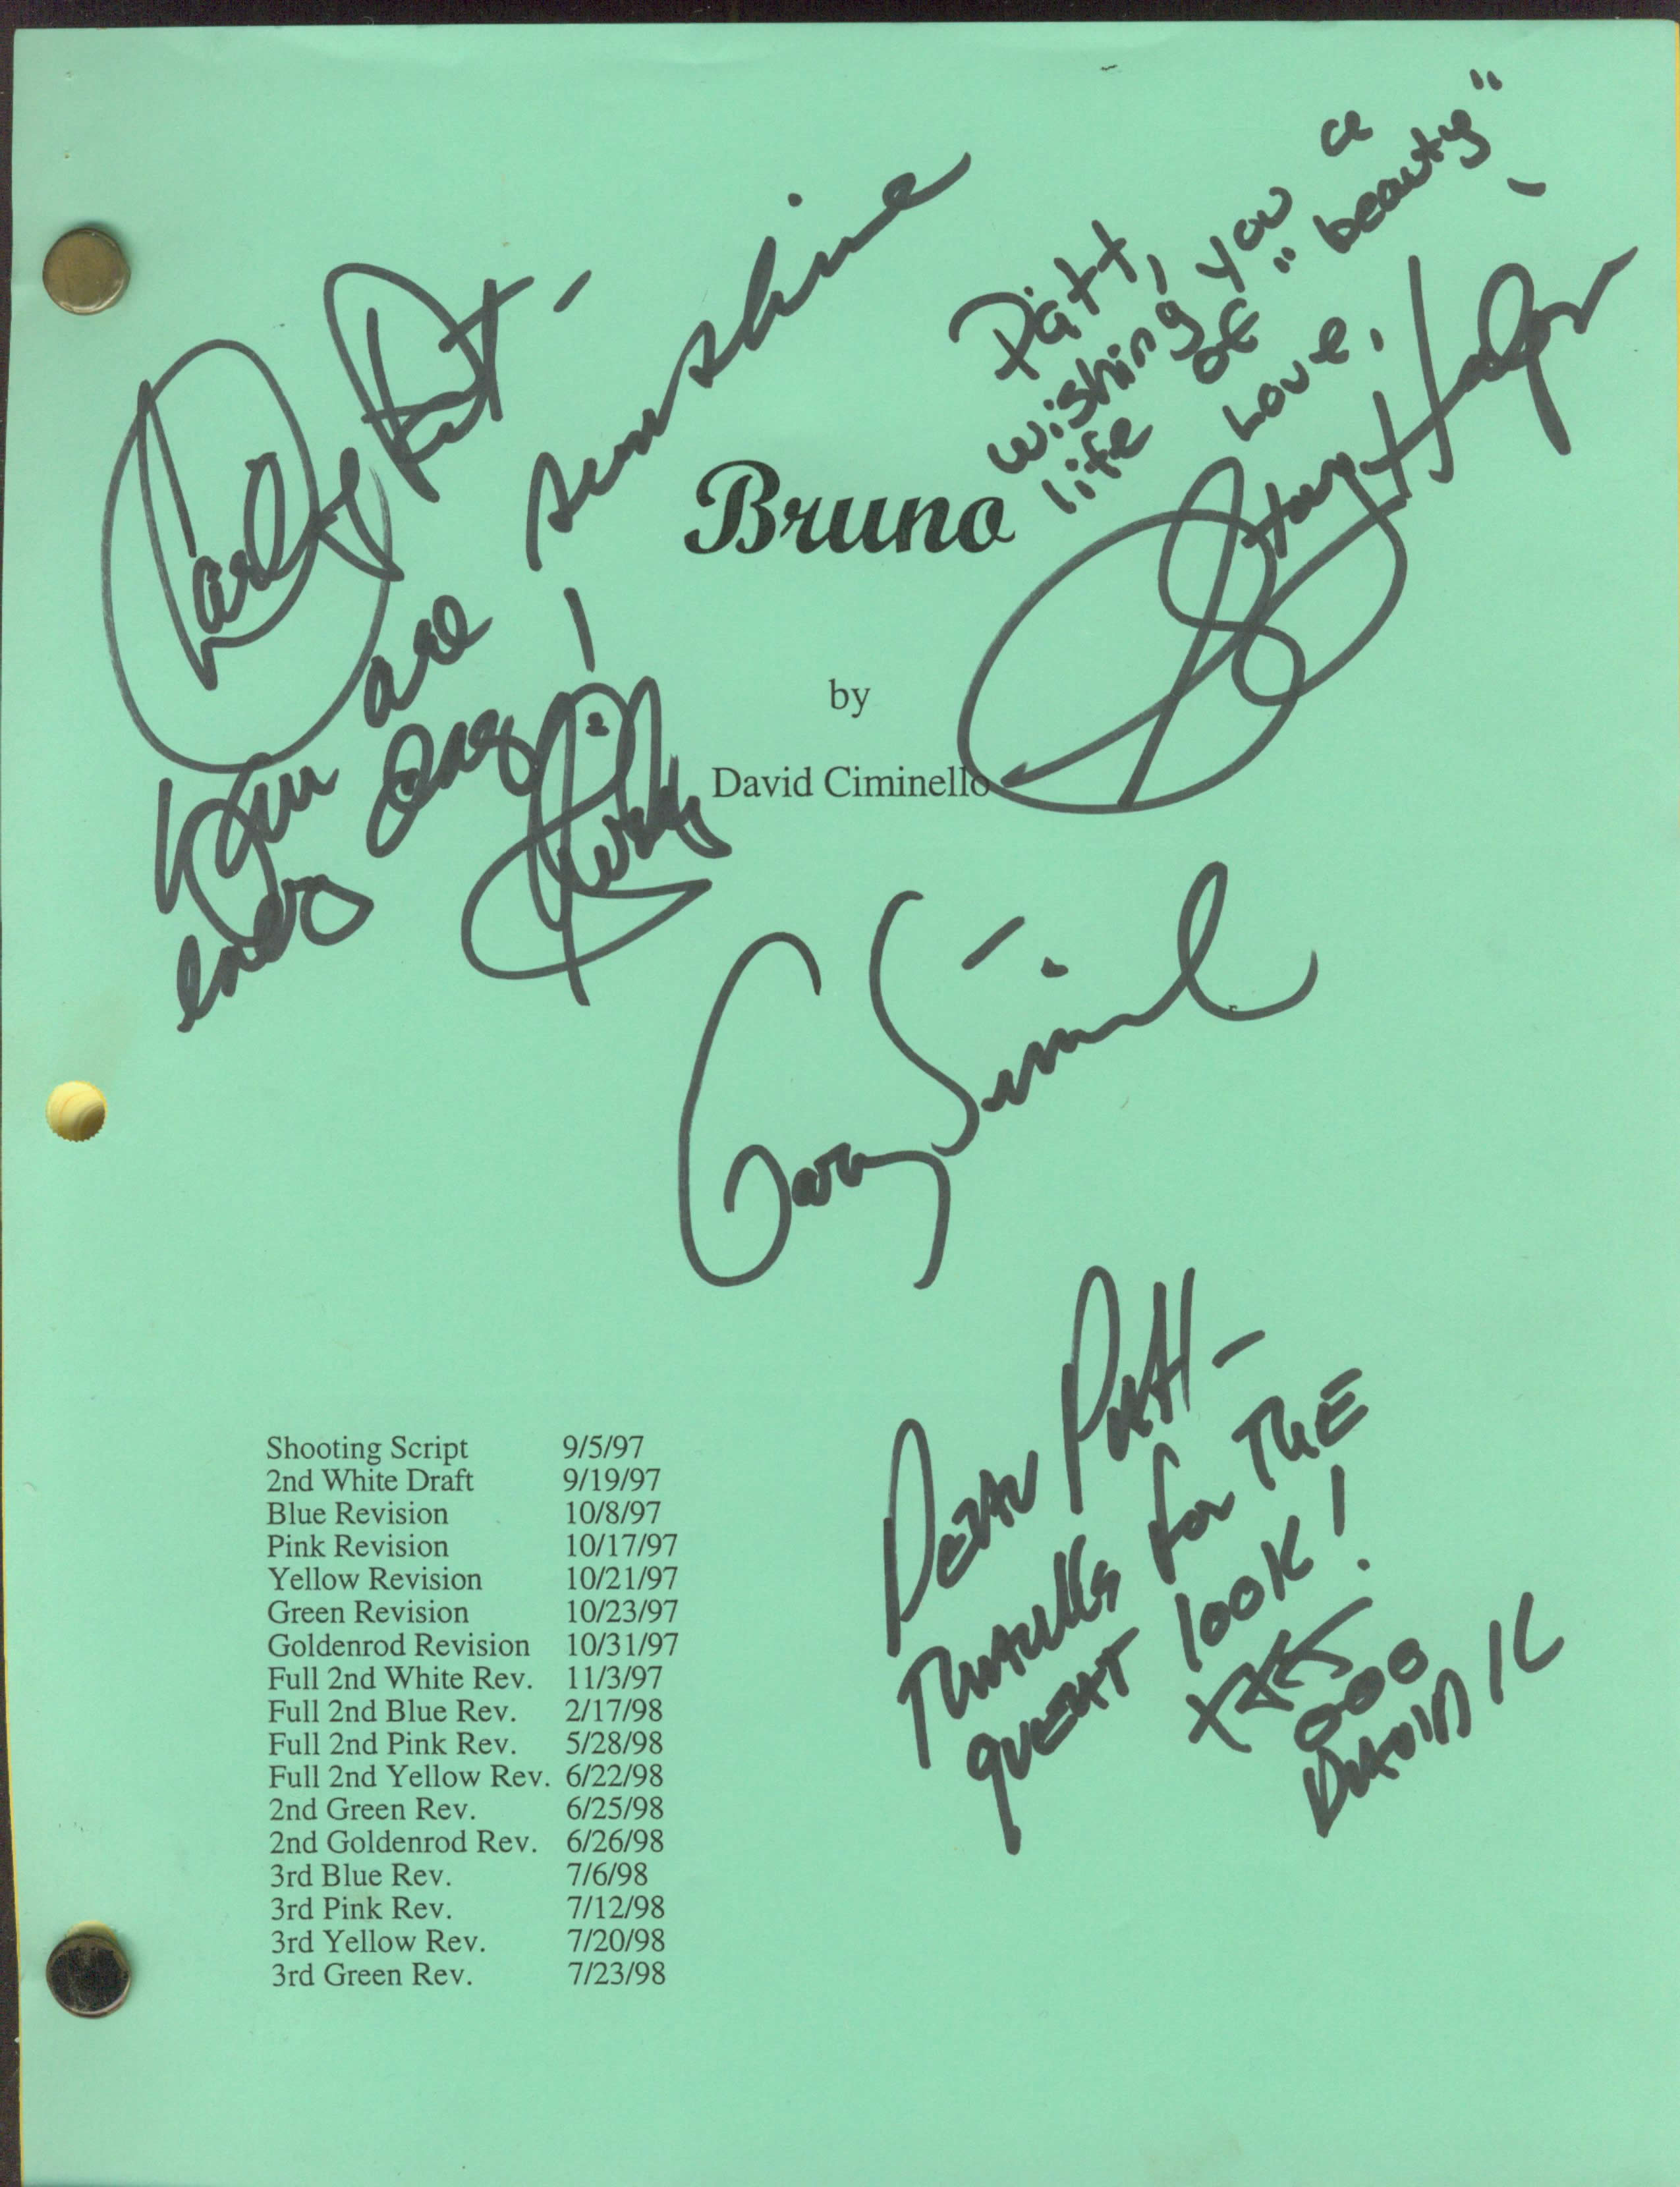 BRUNO / THE DRESS CODE: Signed script cover to Patt Noday from Director and Co-Star Shirley MacLaine, Gary Sinise, Stacy Halprin, and more.